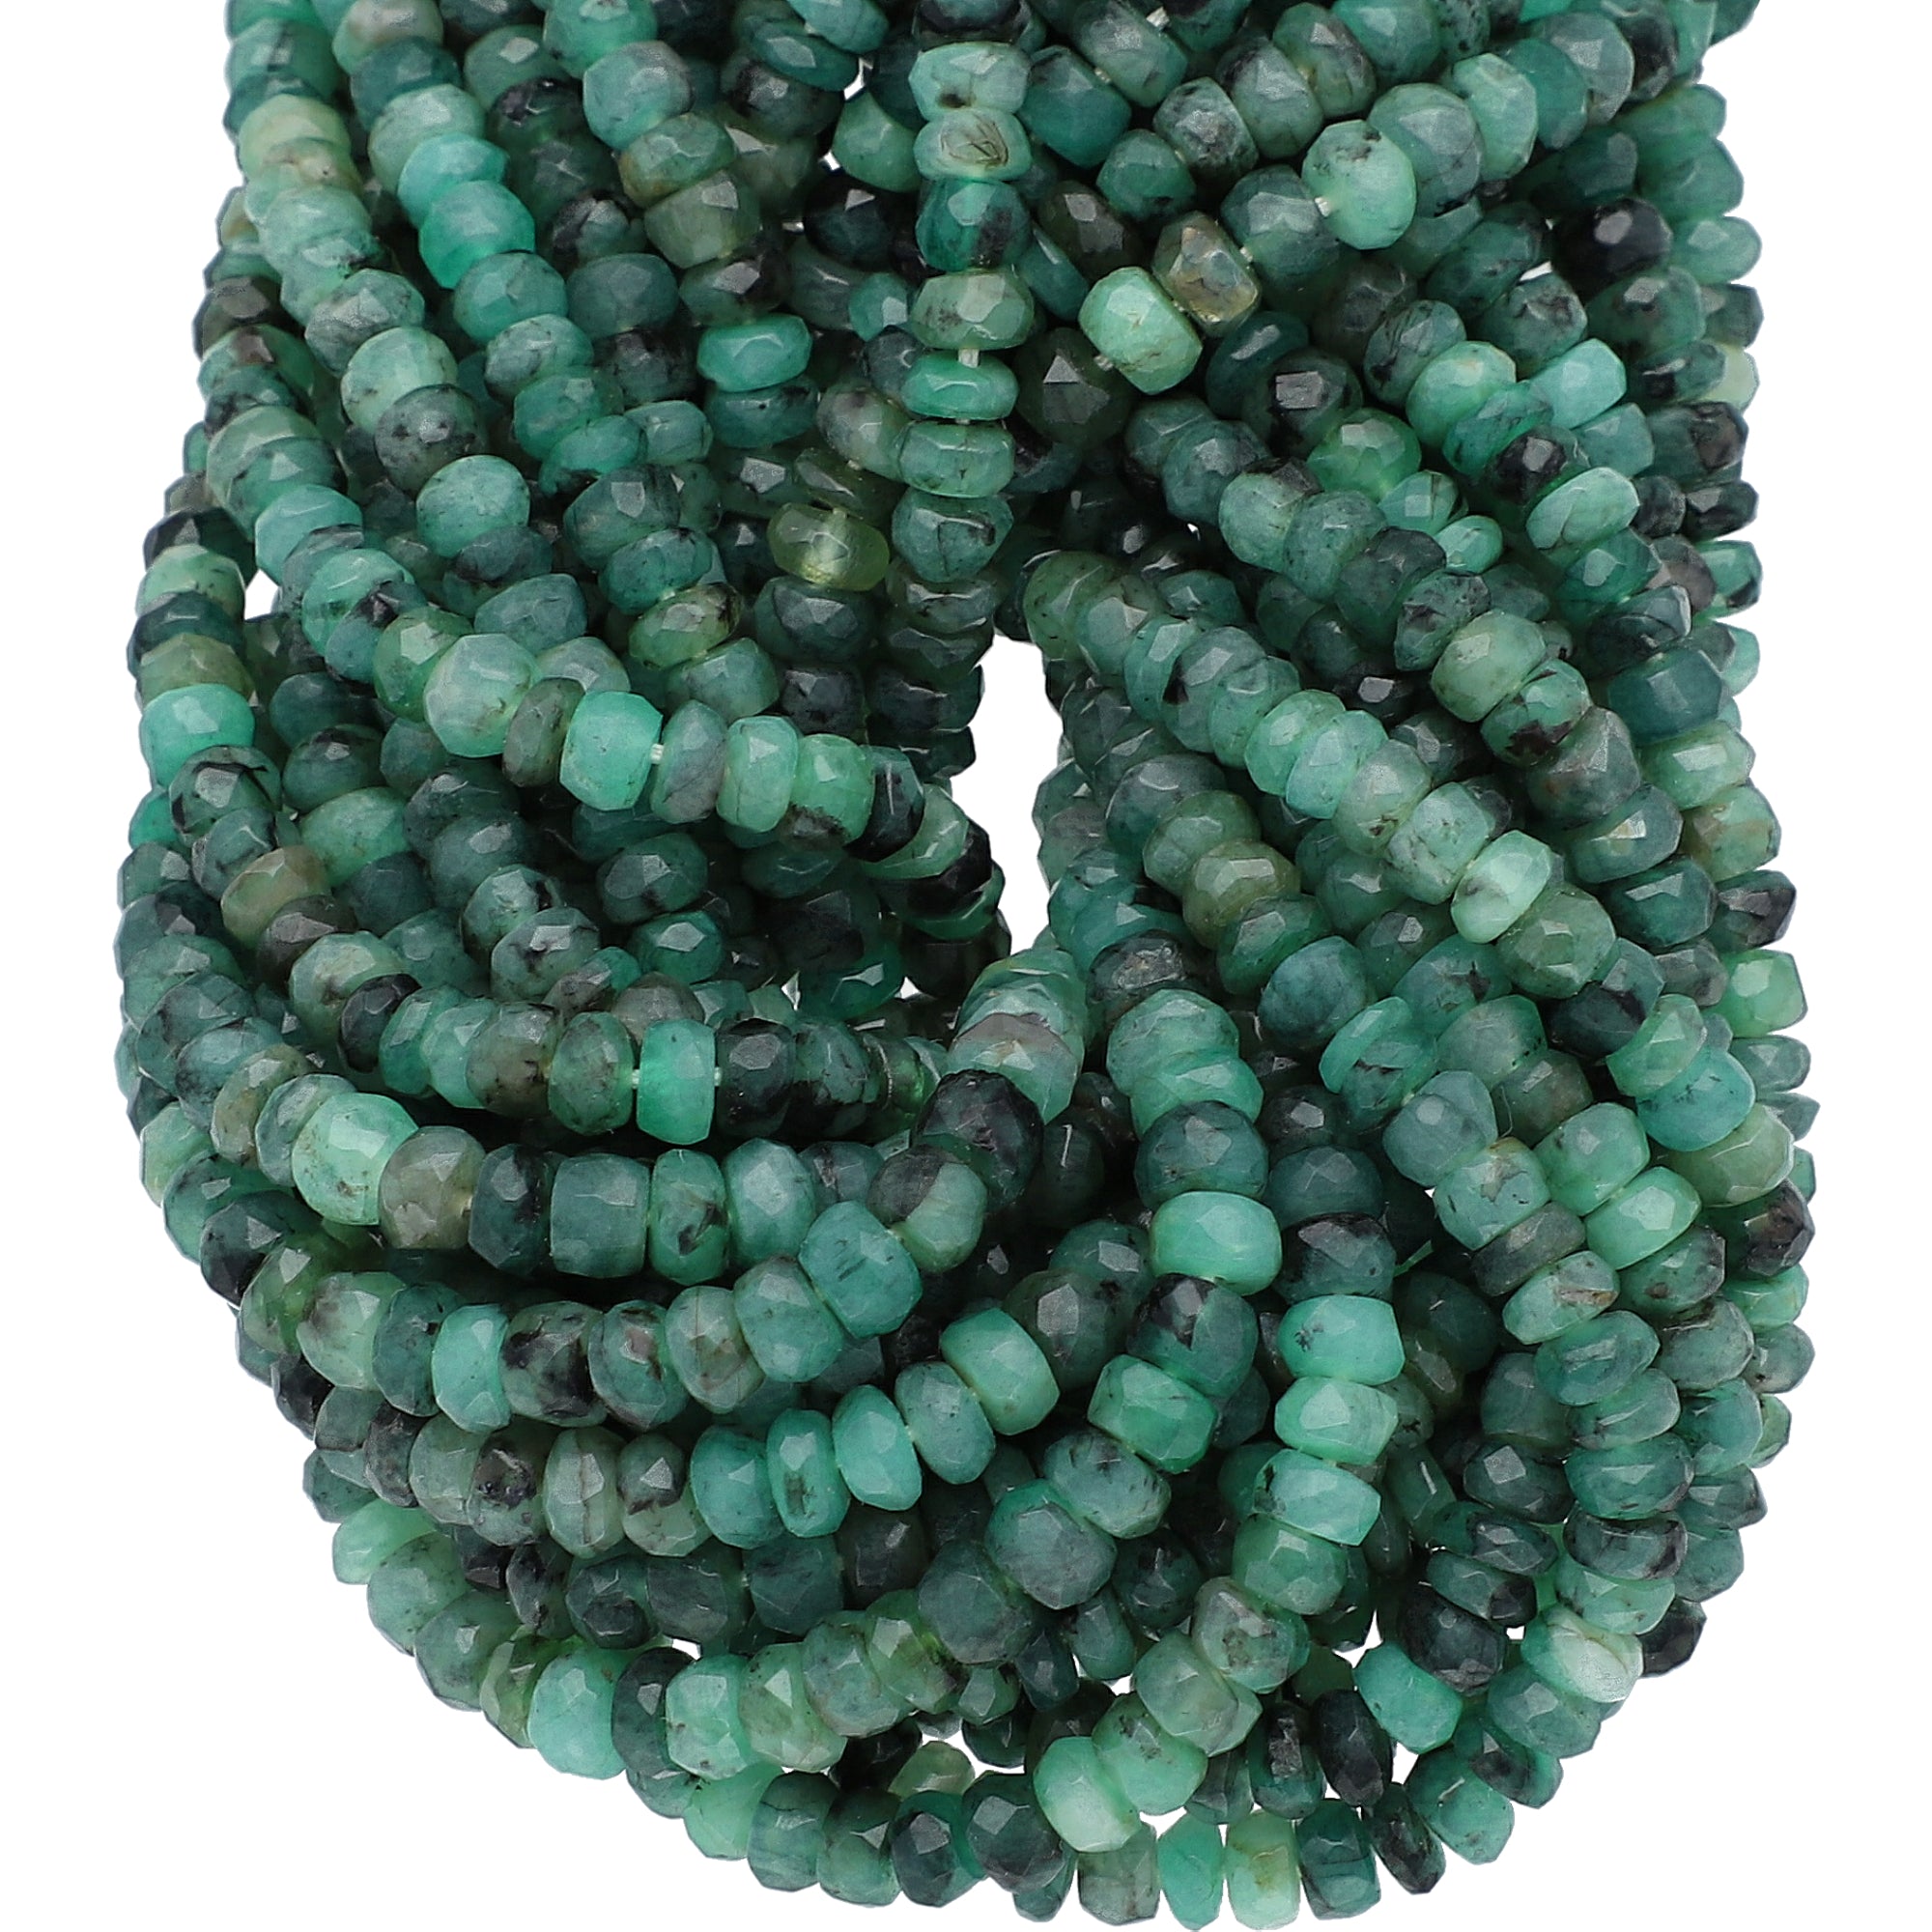 Raw Emerald 4.5 To 5 MM Faceted Rondelle Shape Beads Strand 1mm Drill